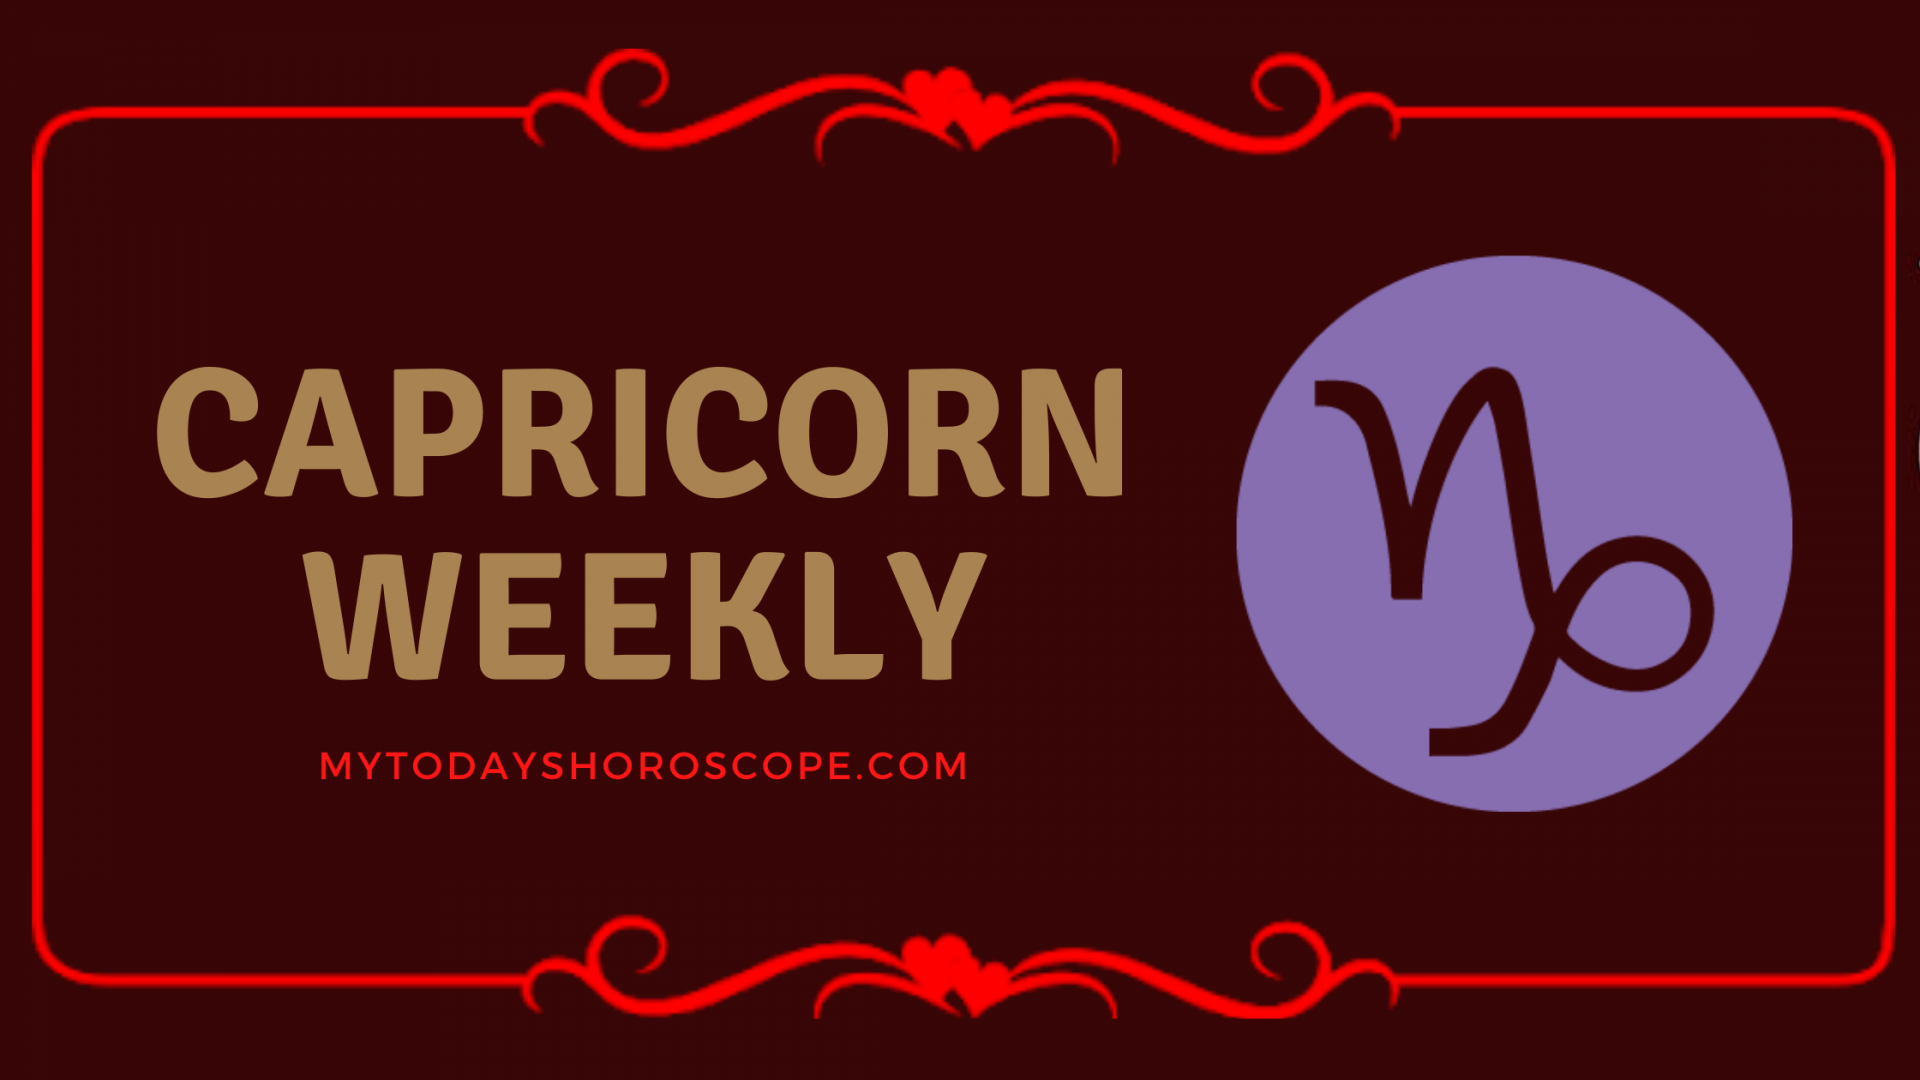 Capricorn weekly horoscope (April 19 - 25): Predictions for Love, Money, Career and Health